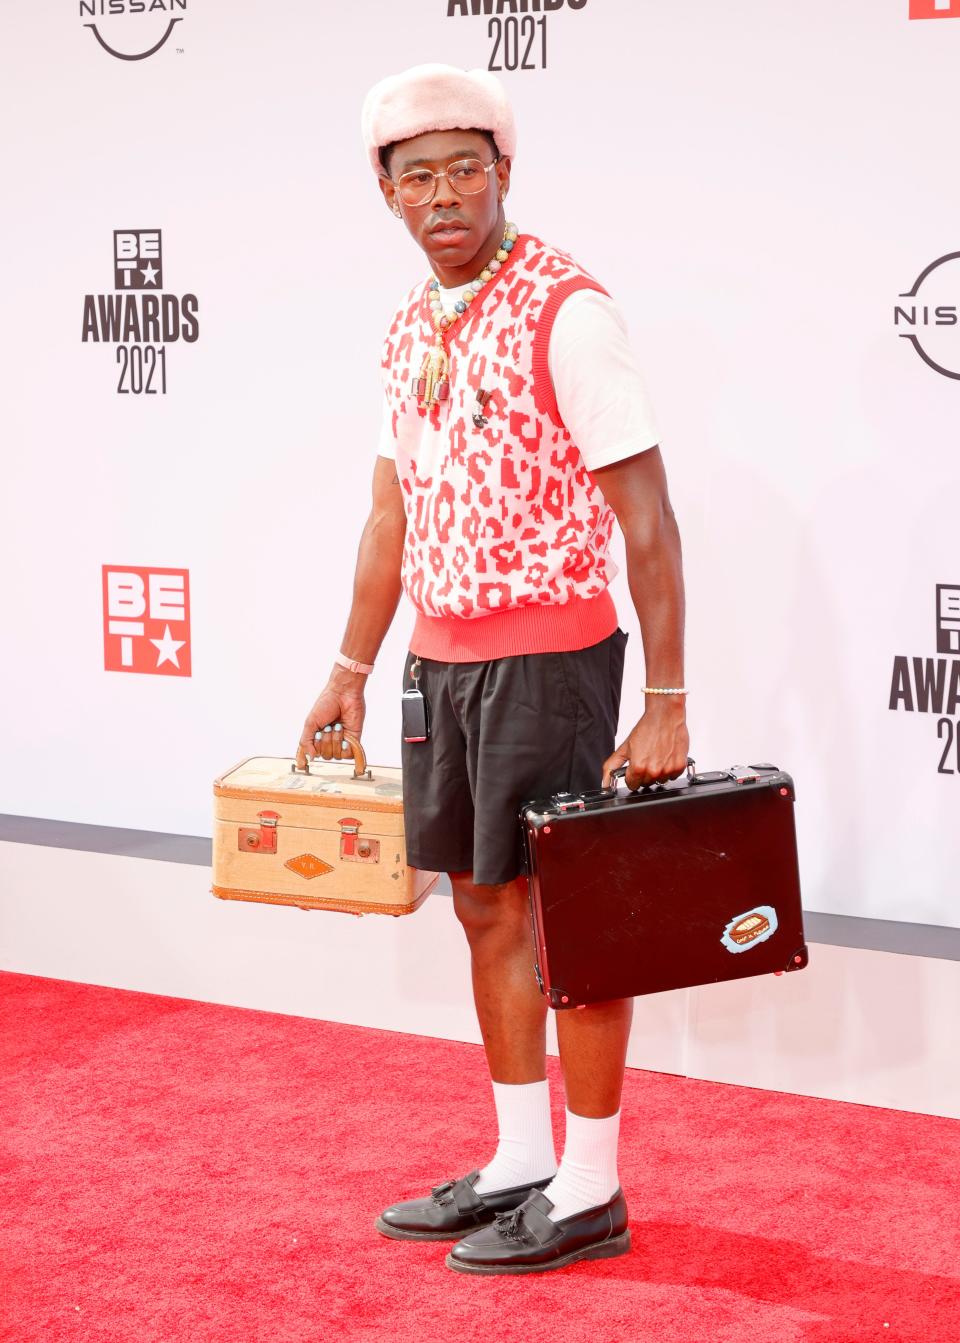 Tyler the Creator at the 2021 BET Awards.